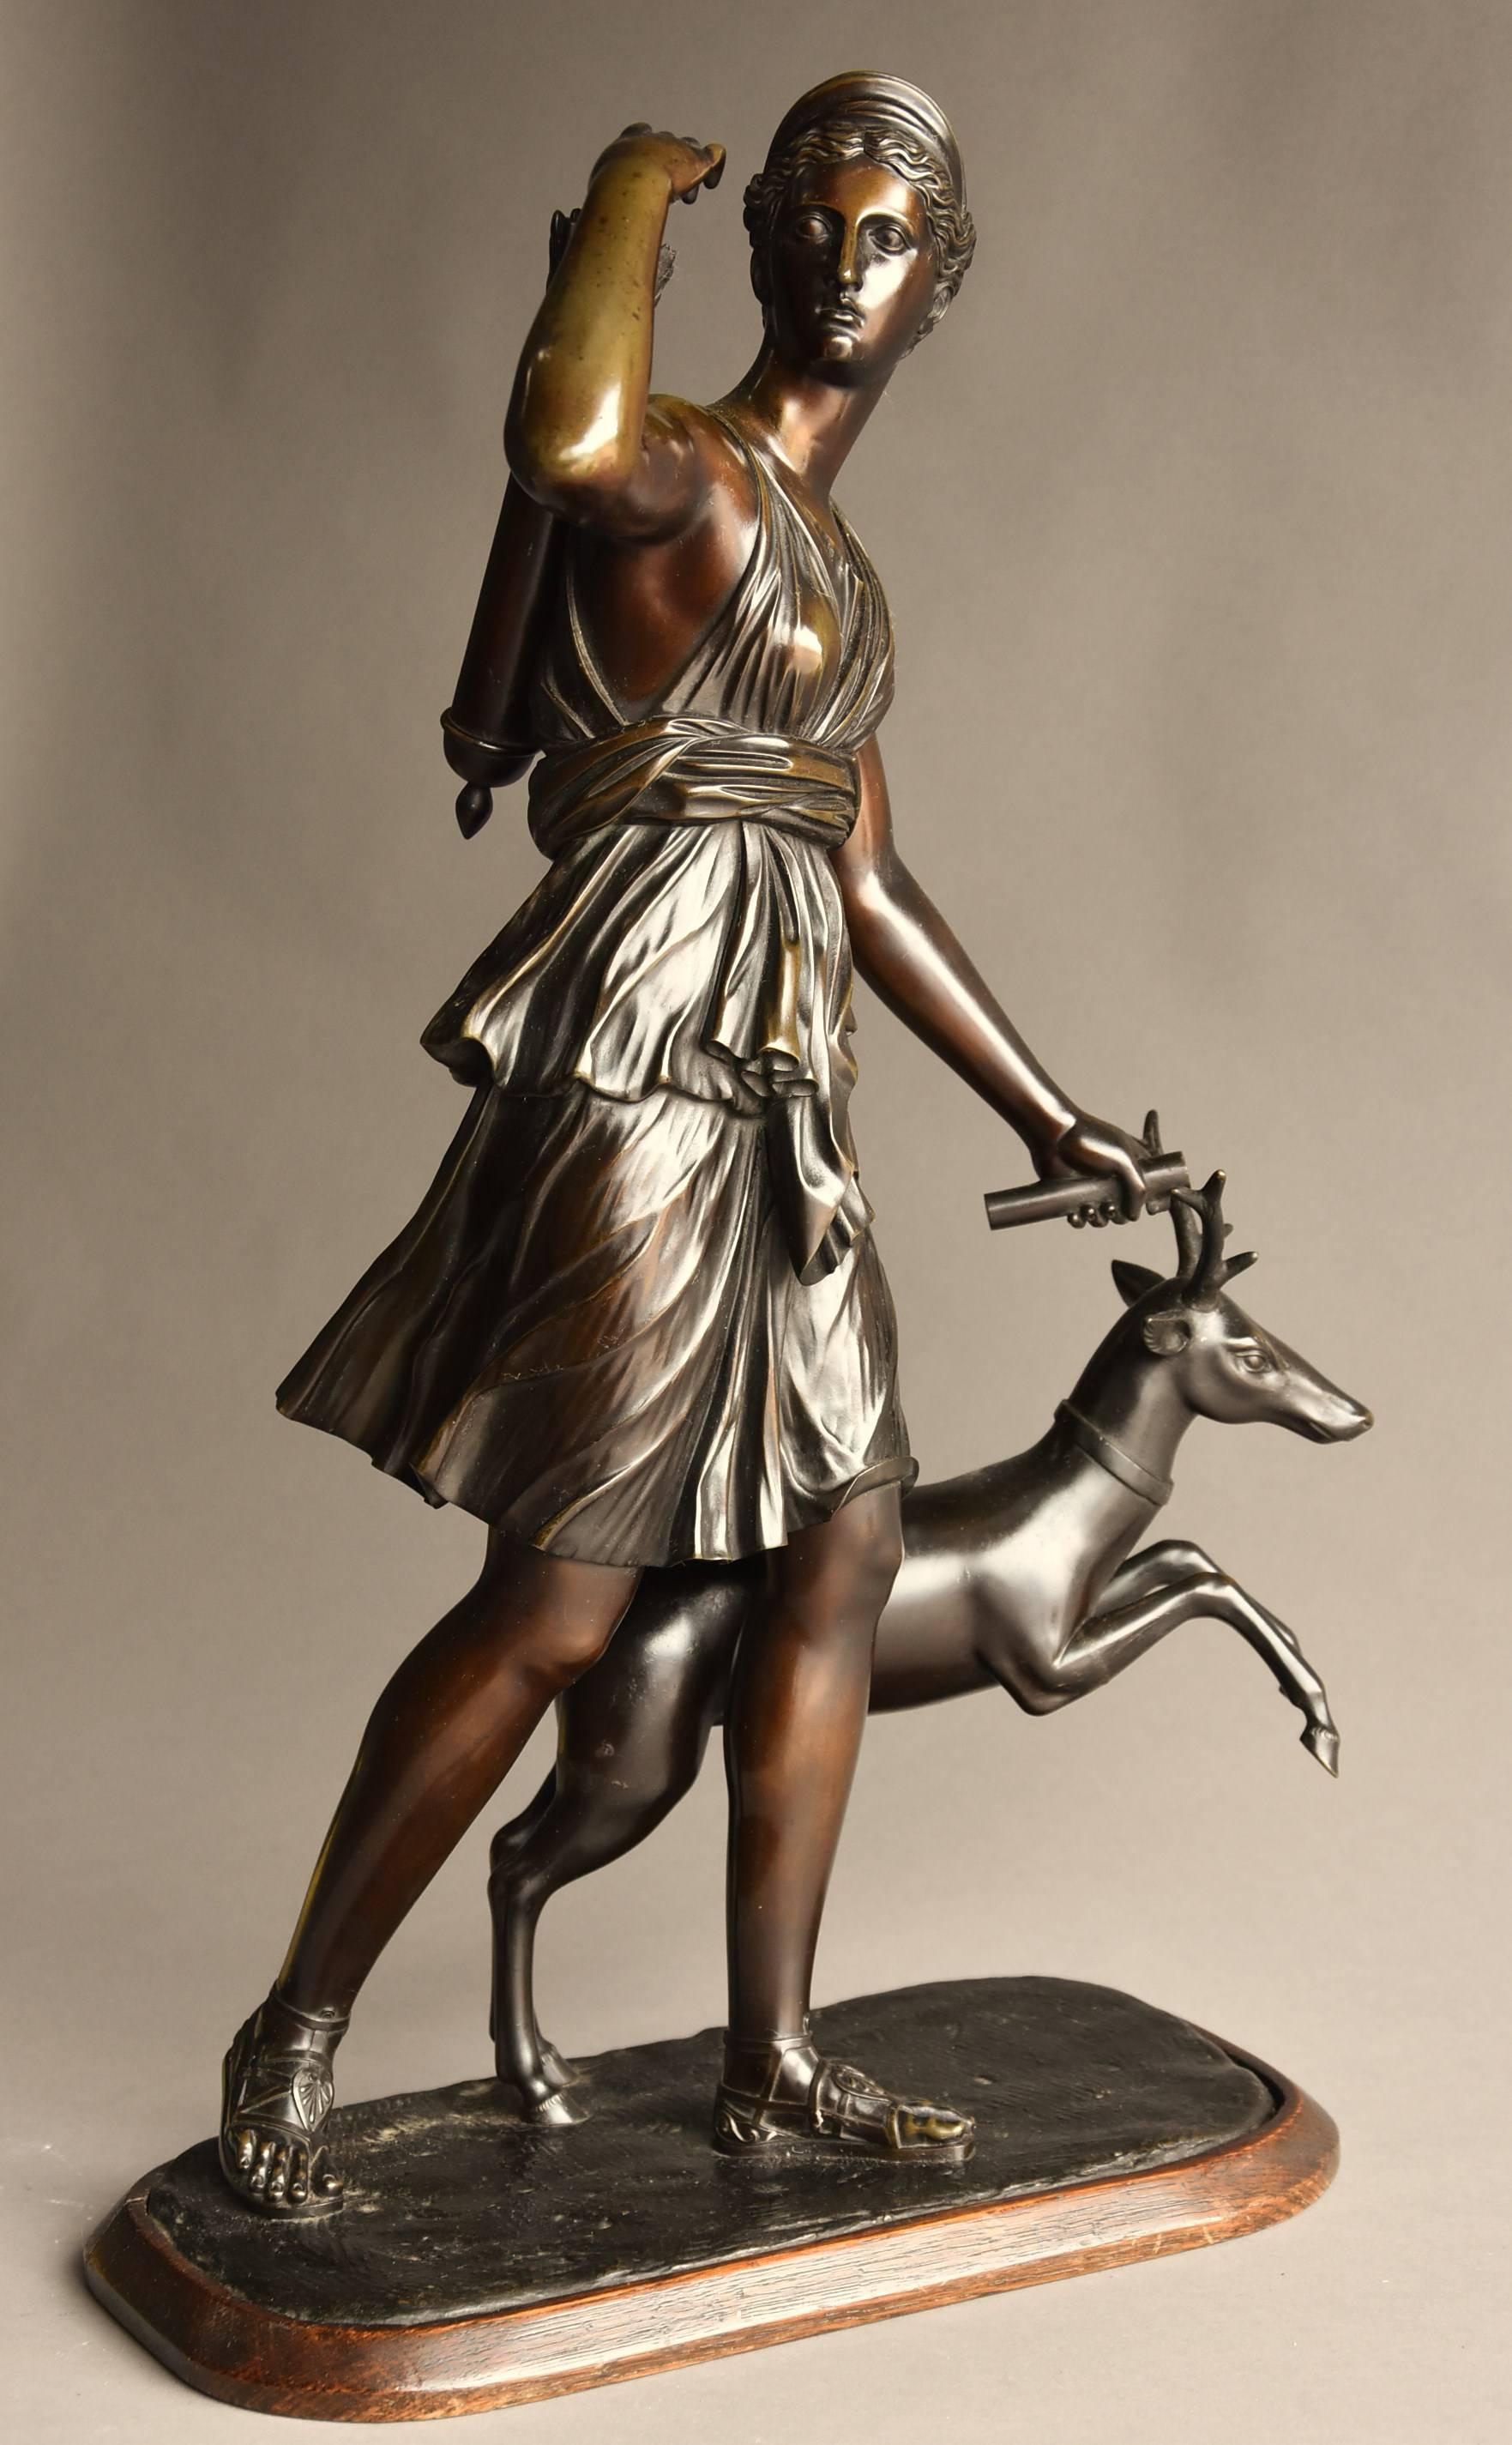 A mid-19th century bronze figure 'Diana of Versailles' or 'Diana the Huntress', after the antique, taken from the original large marble sculpture in The Louvre, Paris.

In this bronze, Diana is portrayed as the huntress with a vibrant, young male